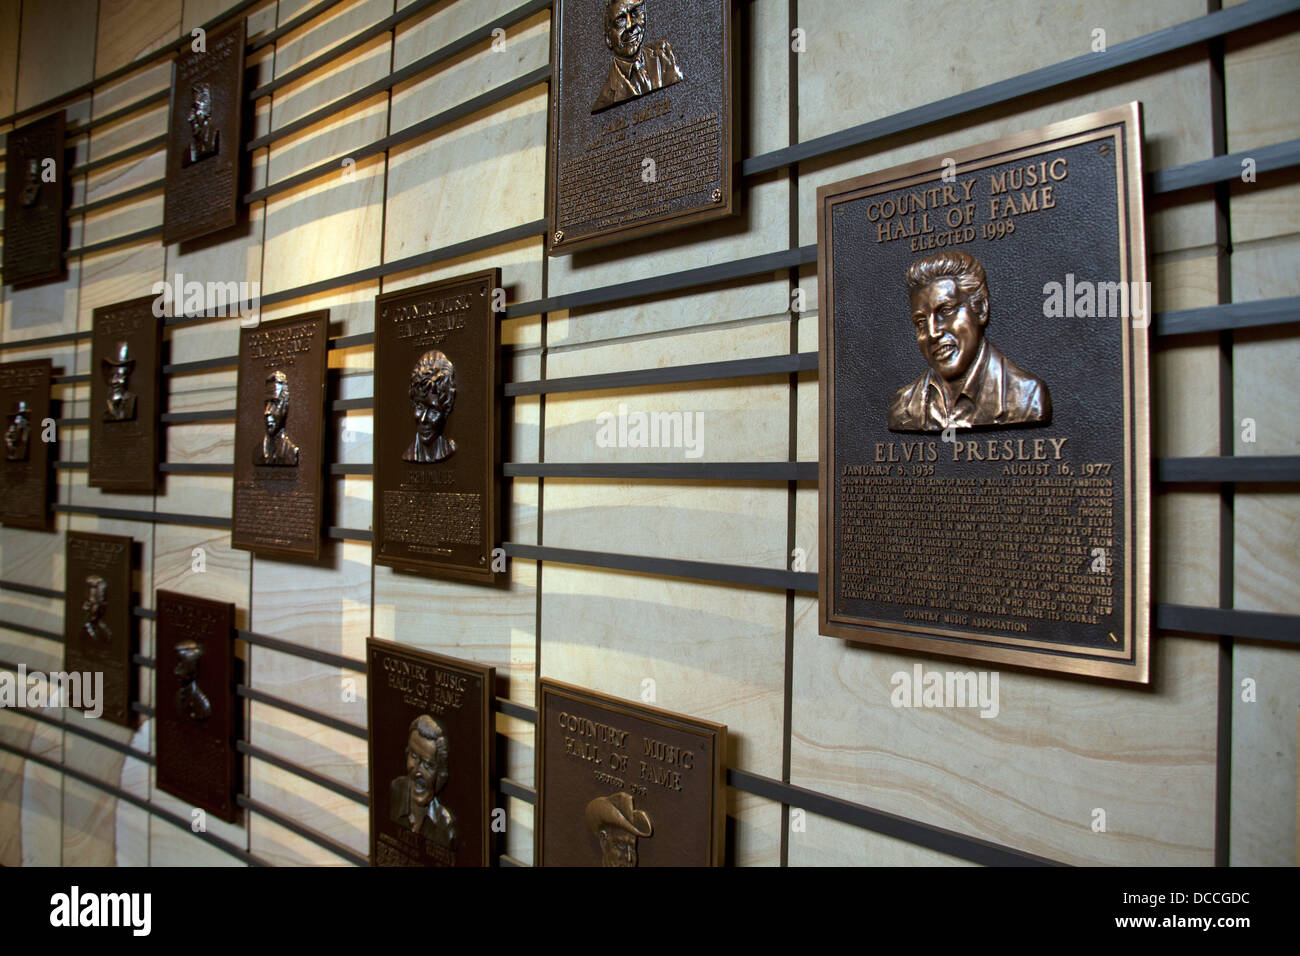 Plaques of the country and rock n roll stars inducted into the Country Music Hall of Fame and Museum in Nashville Tennessee USA Stock Photo